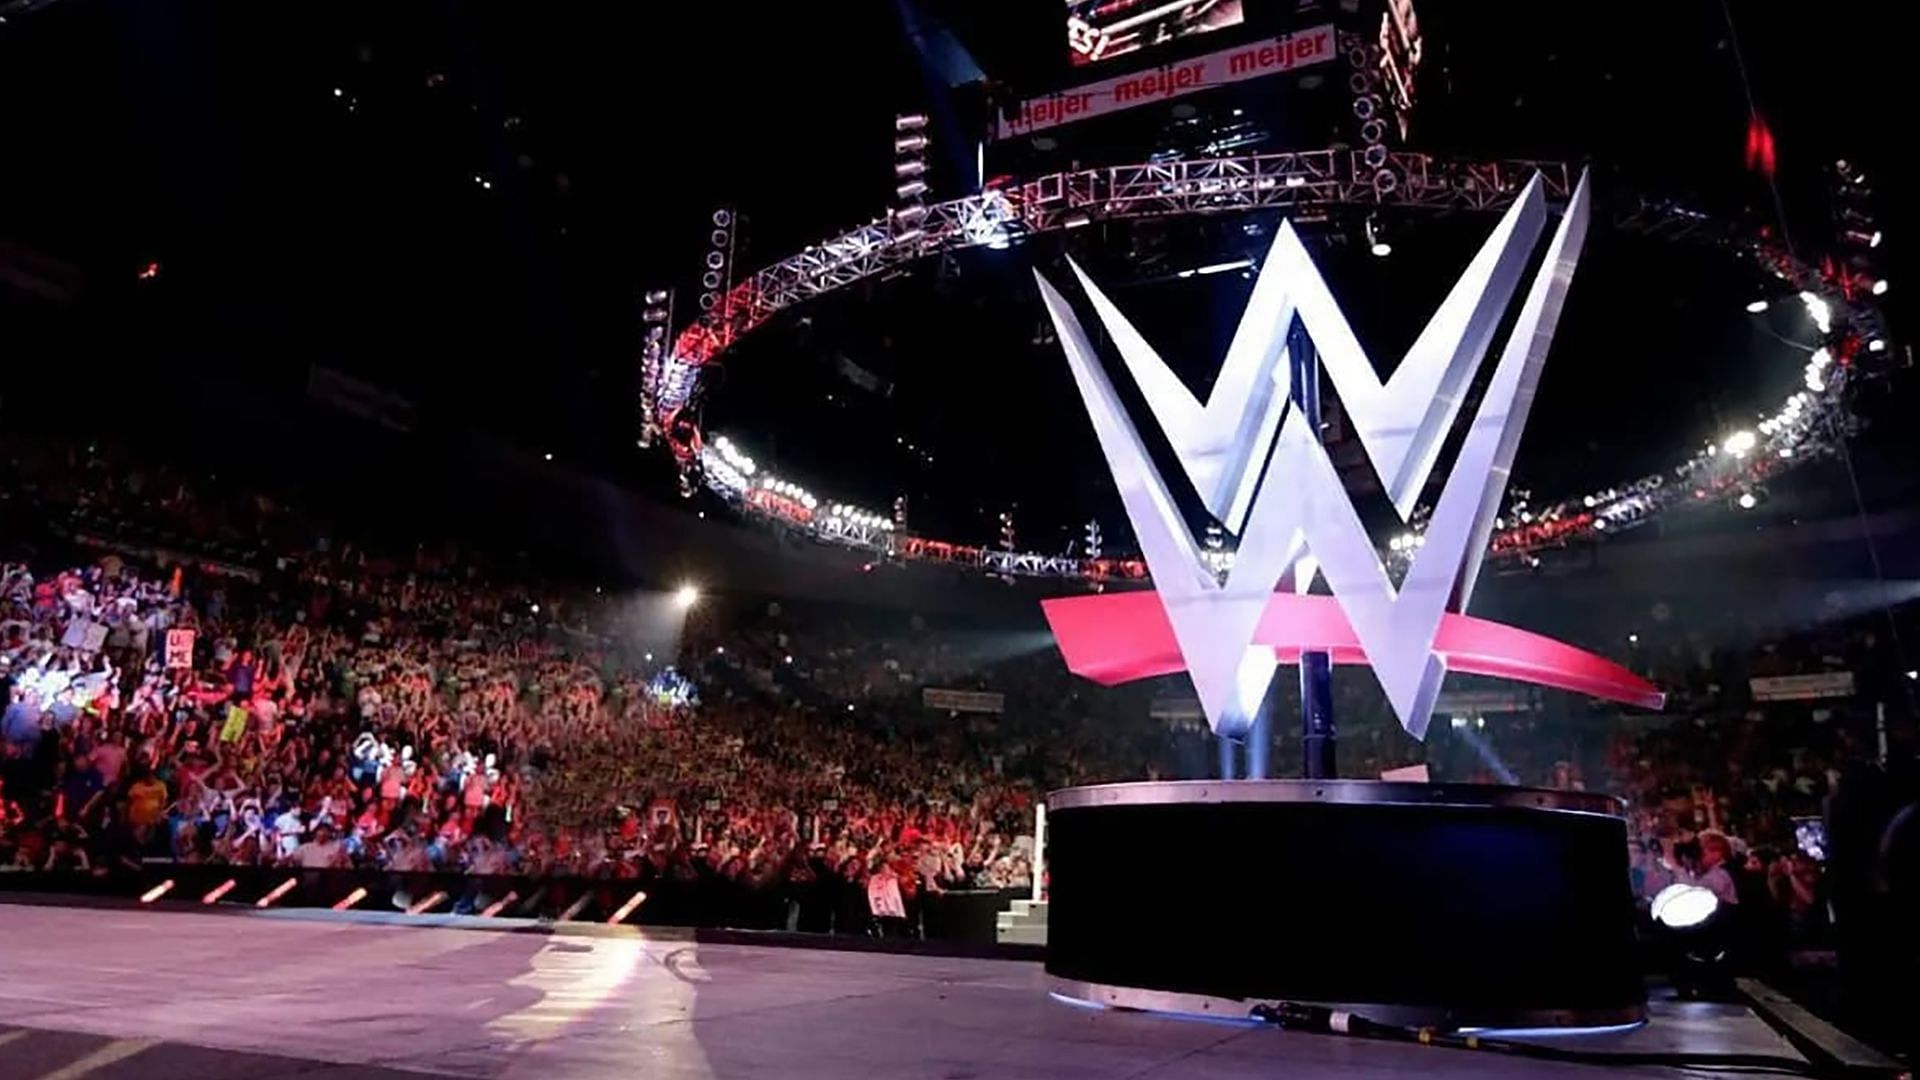 The WWE logo and stage/set on display inside arena